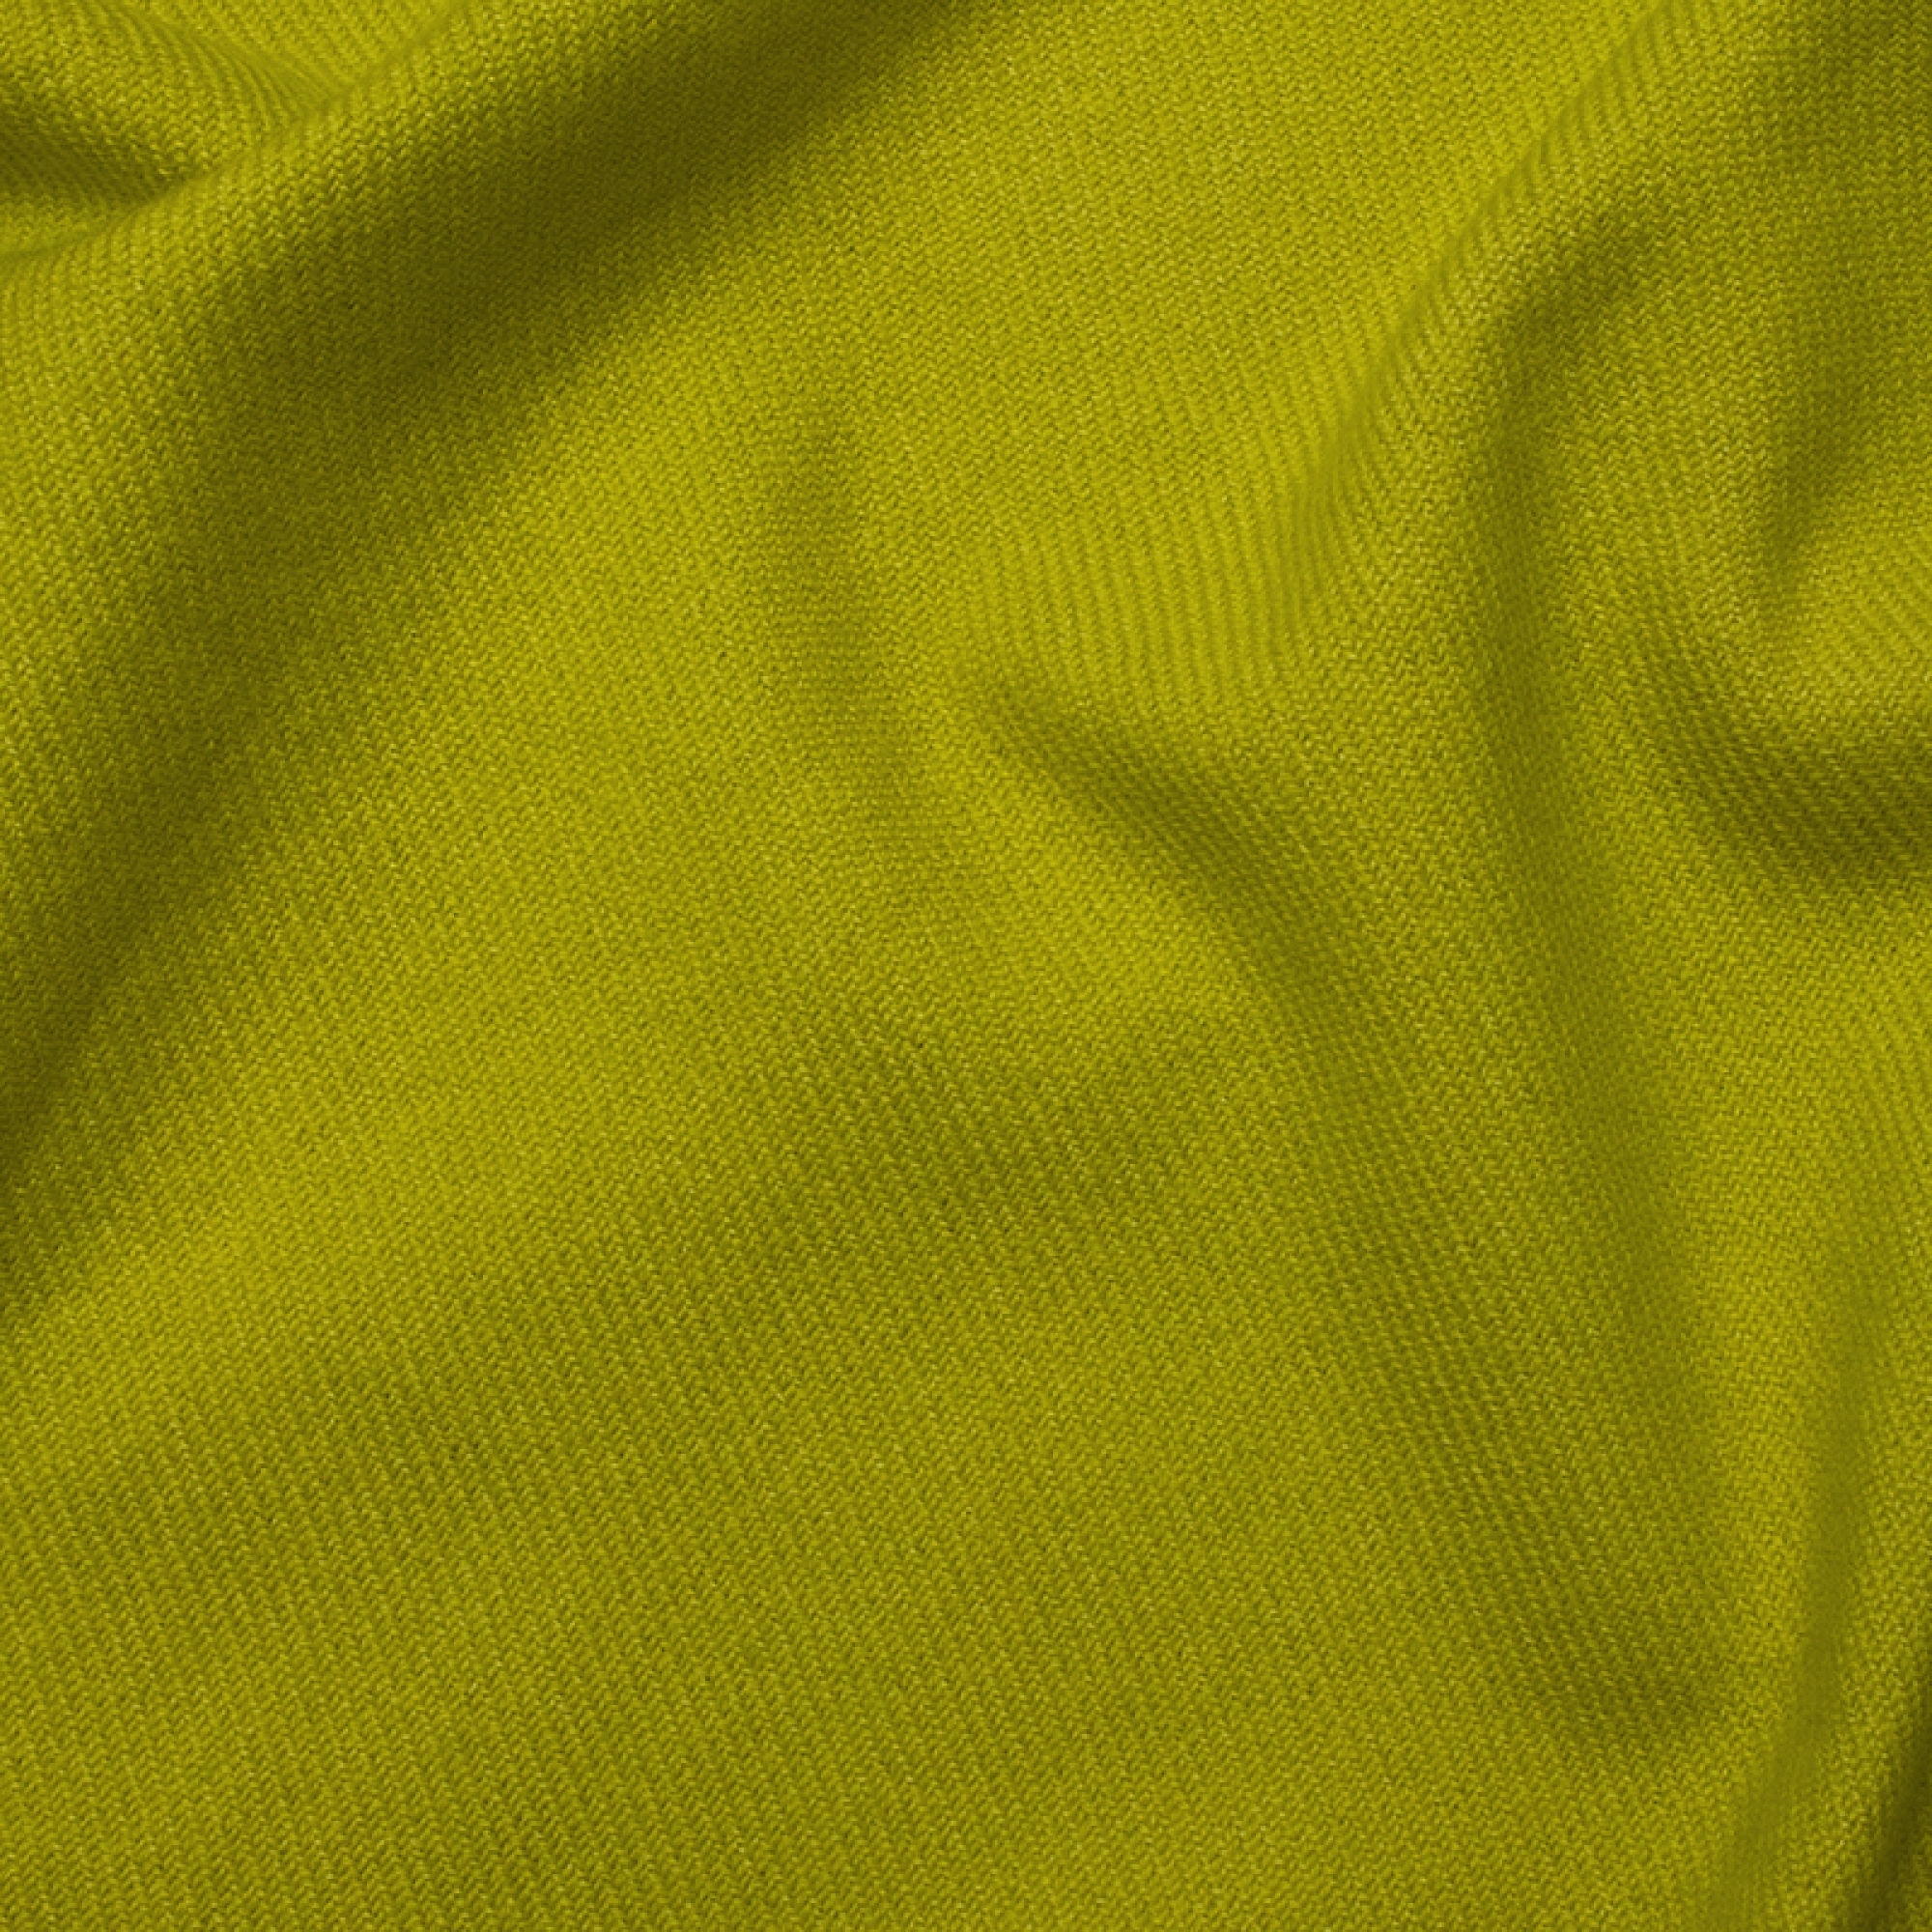 Cashmere accessori cocooning toodoo plain s 140 x 200 verde chartreuse 140 x 200 cm